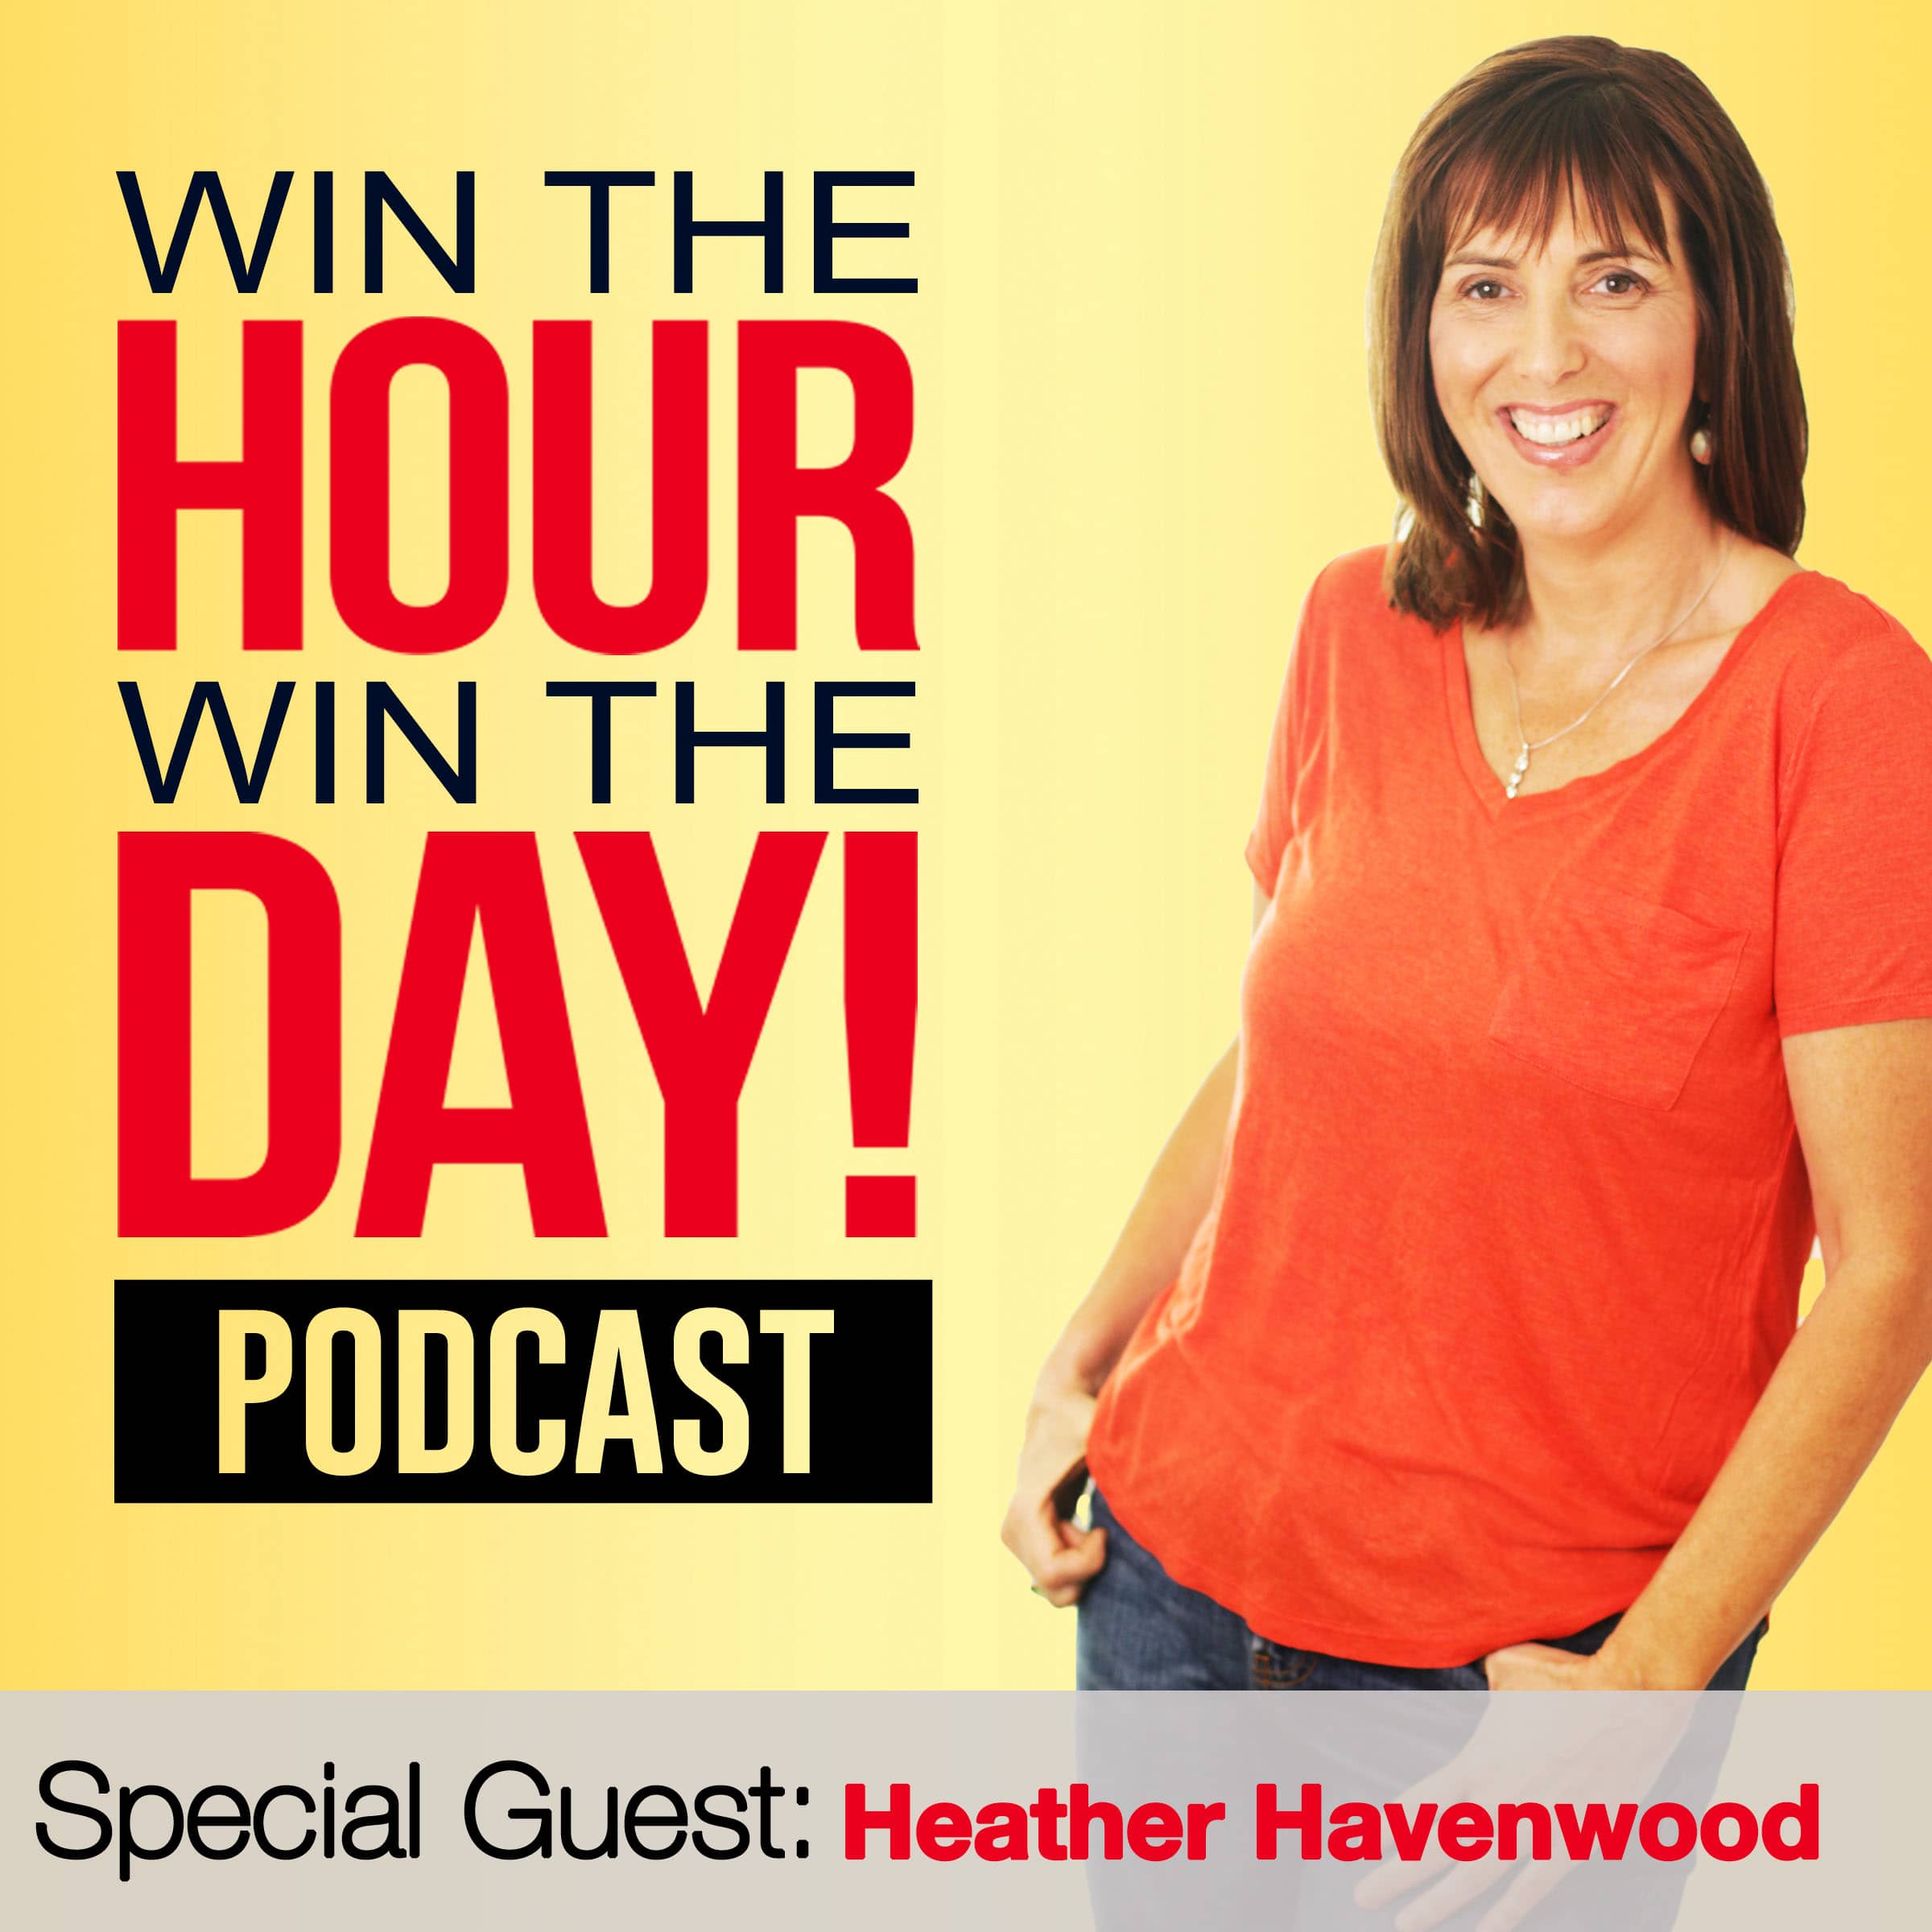 How To Harness The Entrepreneurial Power! With Heather Havenwood